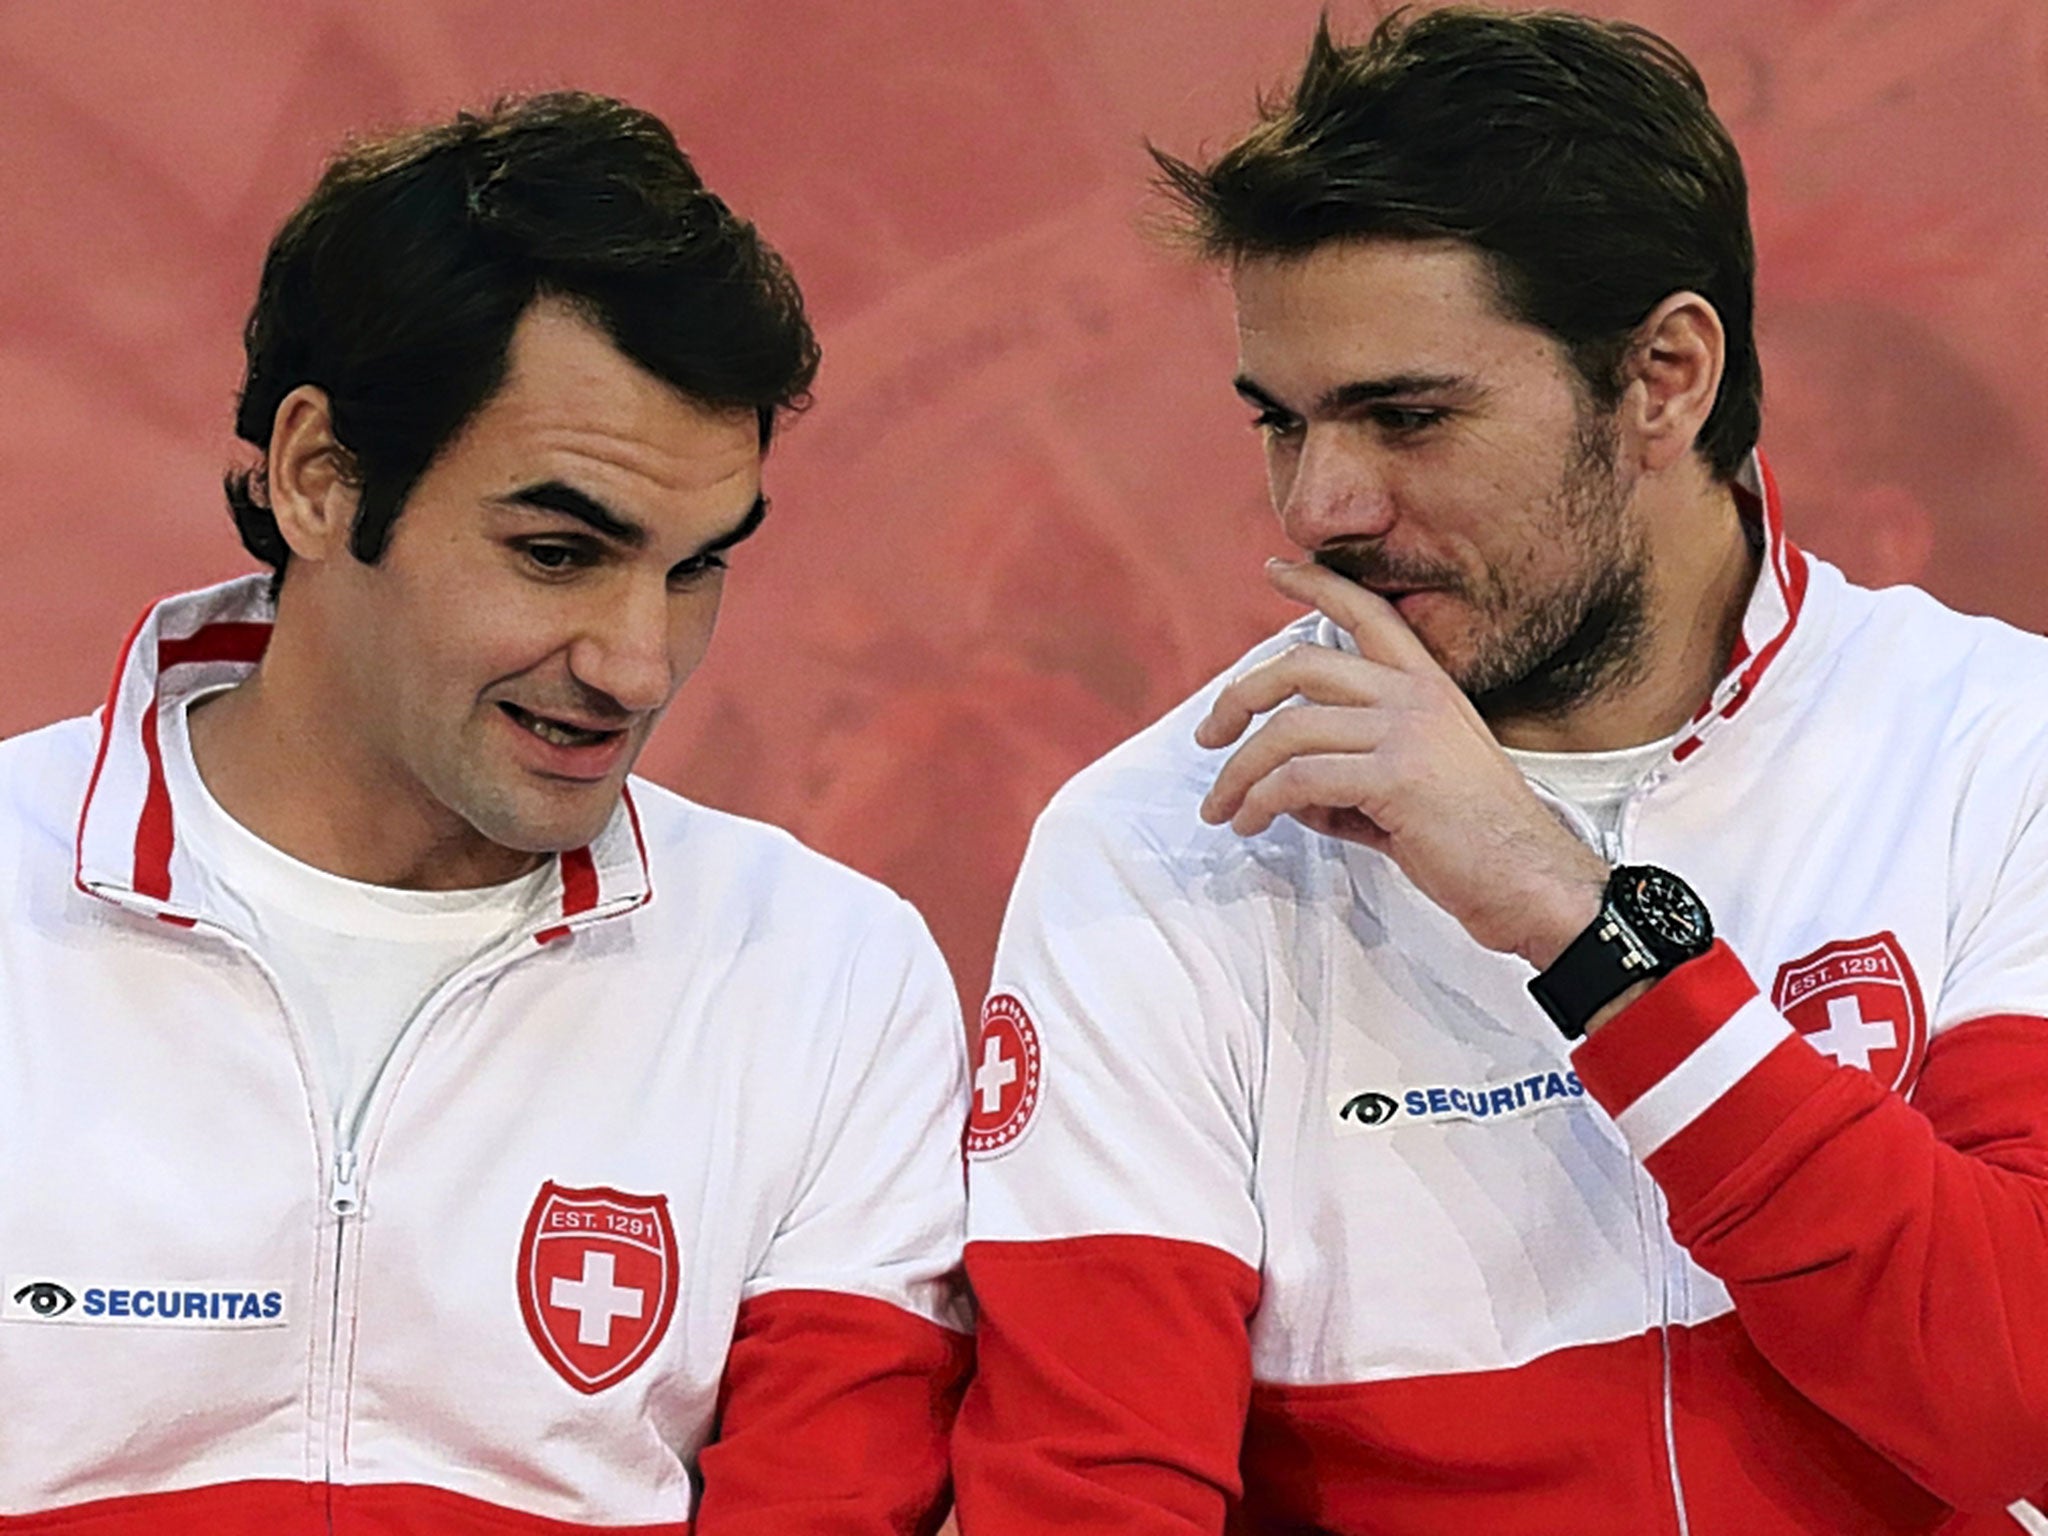 Roger Federer and Stan Wawrinka appear to have forgotten their dispute at the weekend